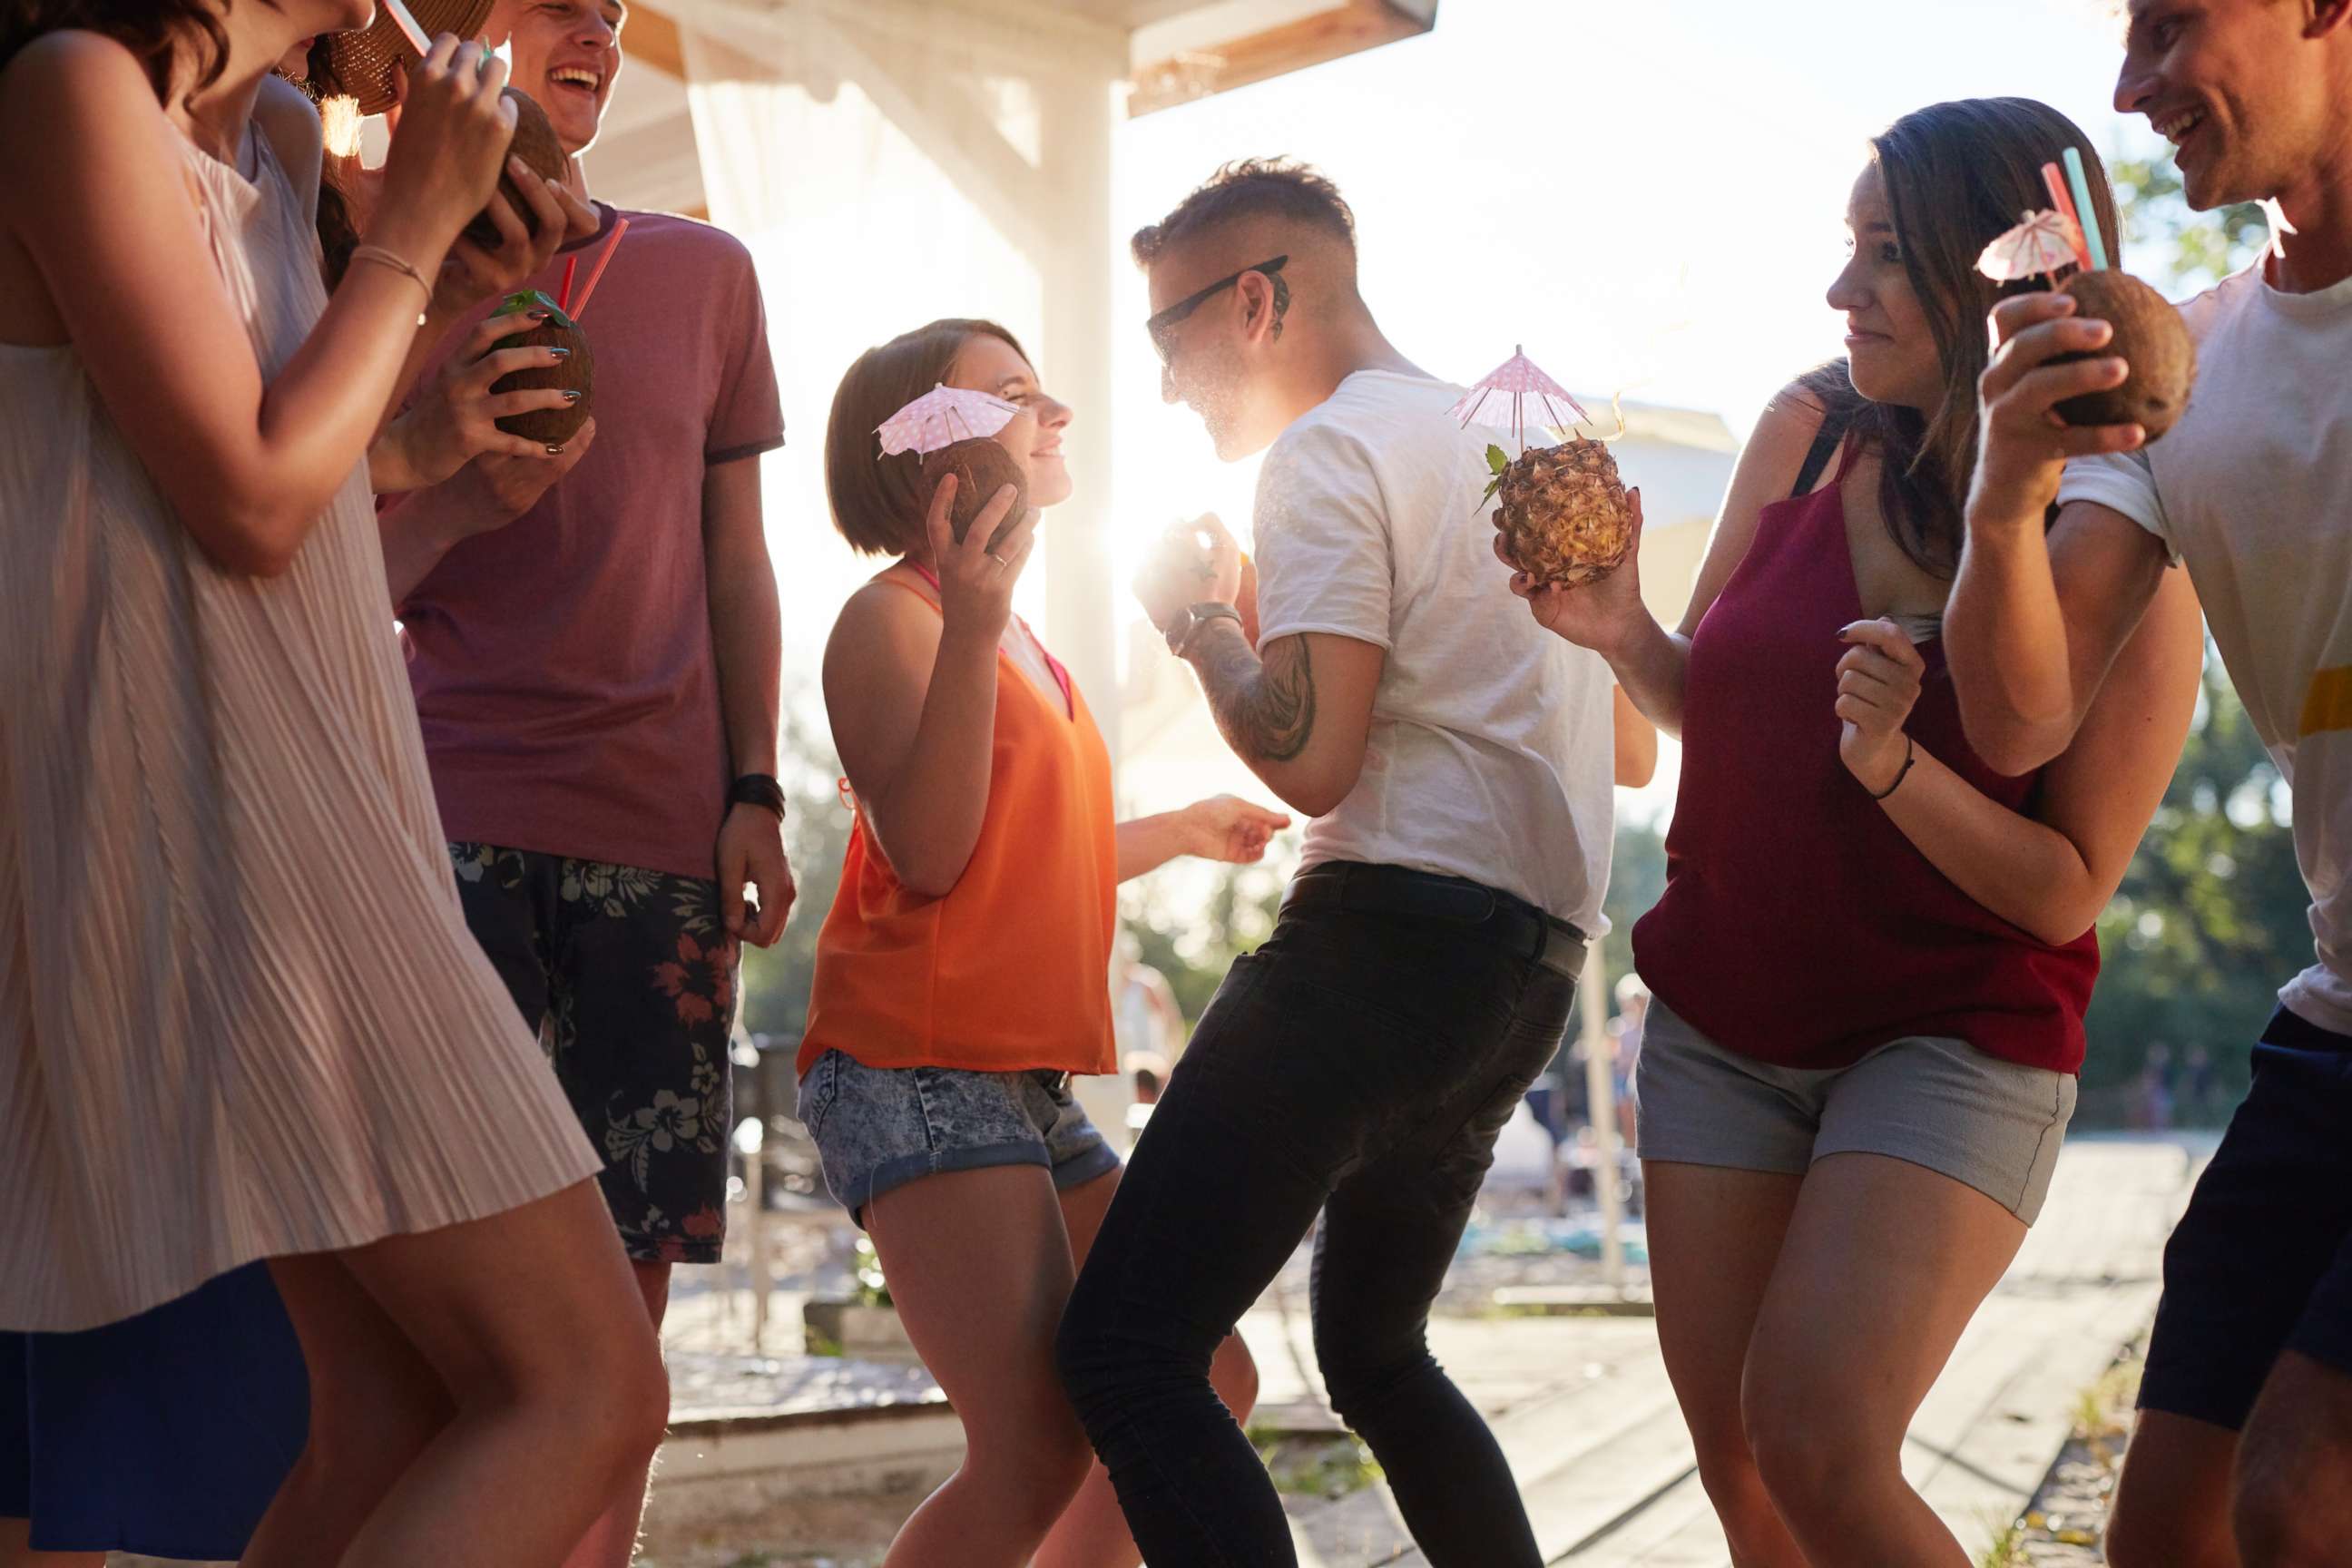 PHOTO: People dance at a summer party in an undated stock photo.